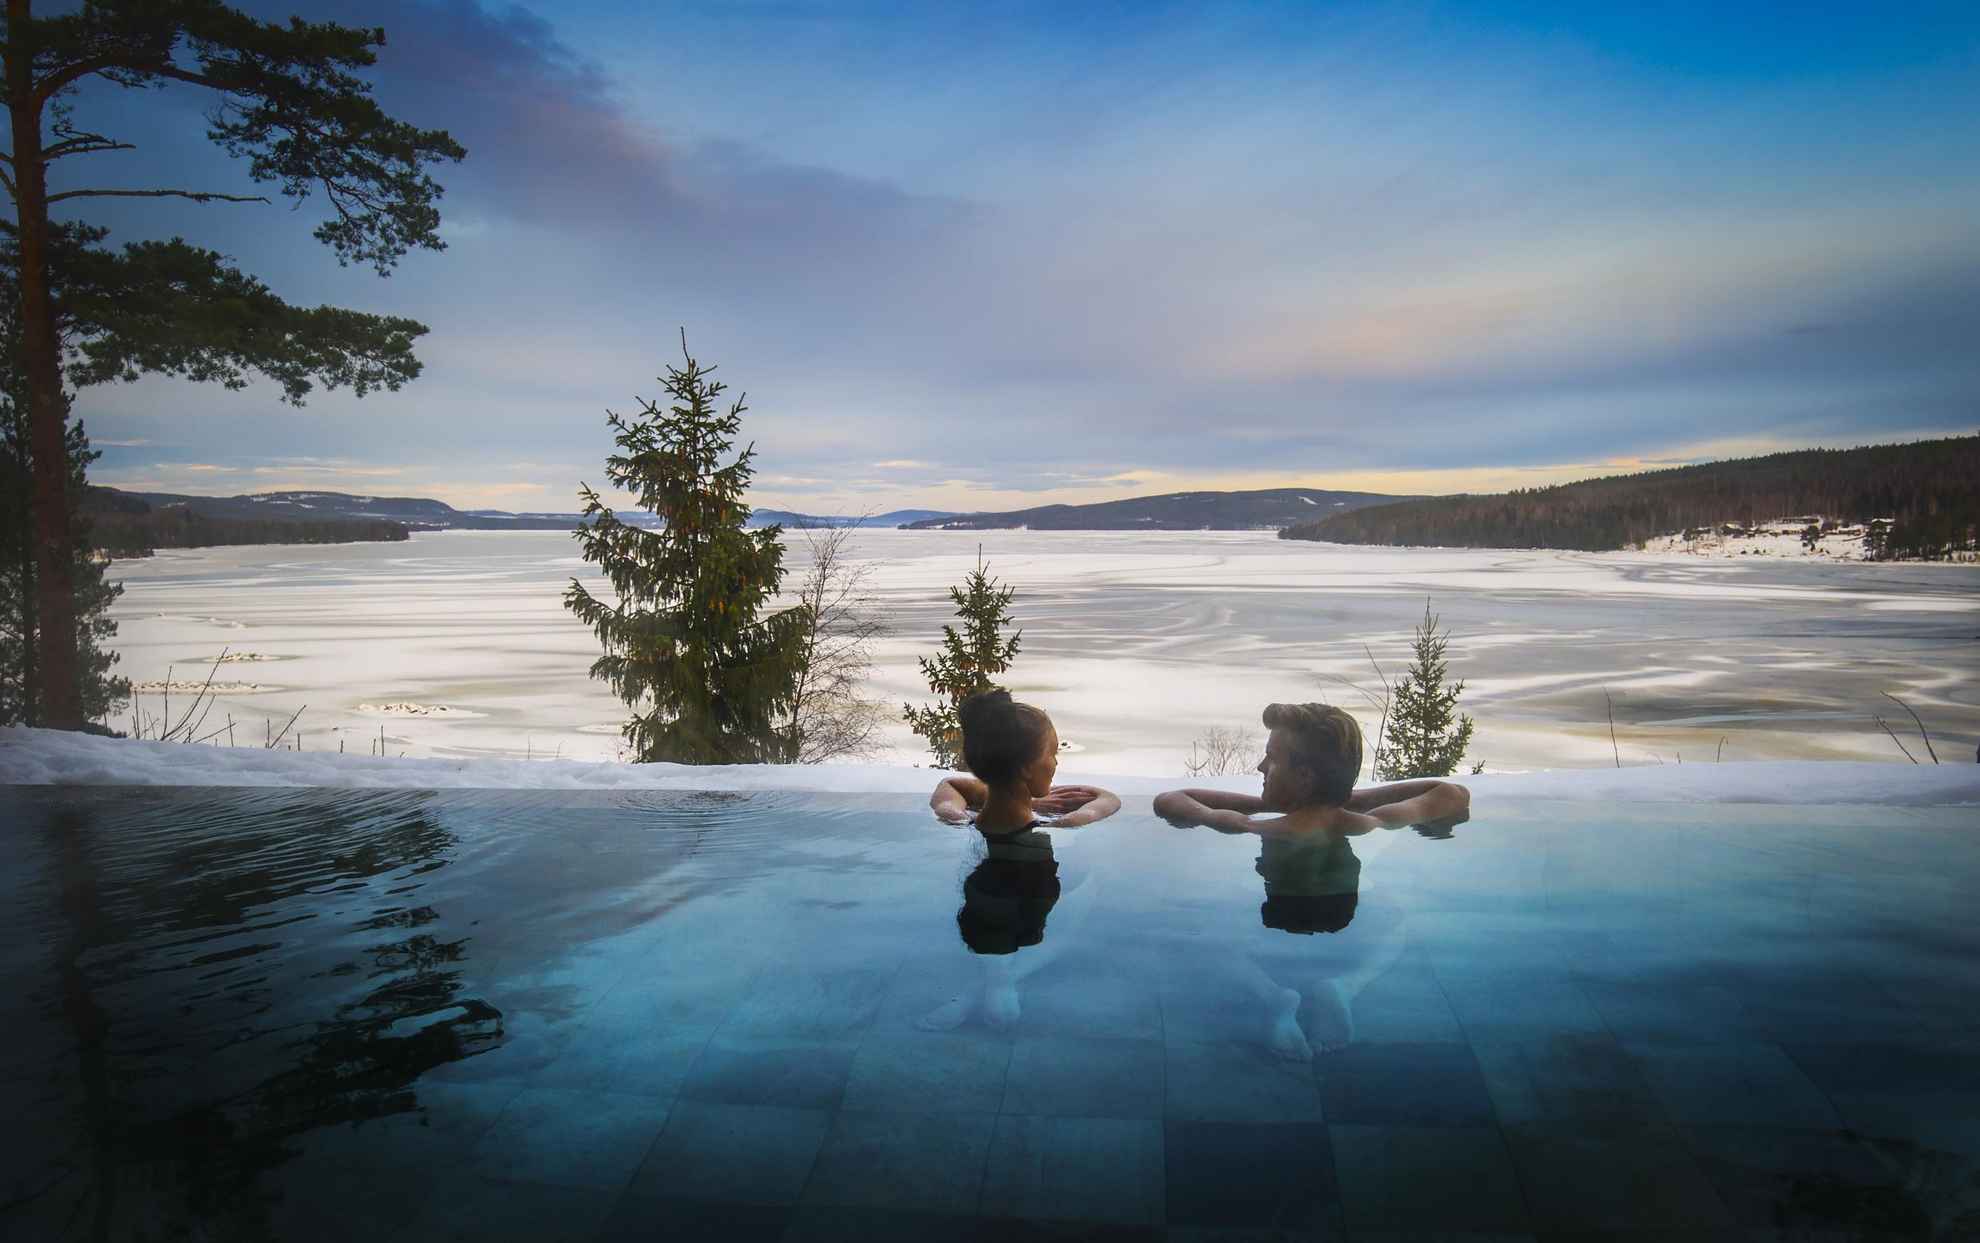 Two people relaxing in the outdoor pool at Orbaden Spa & Resort in Hälsingland, watching the snow coated water view.